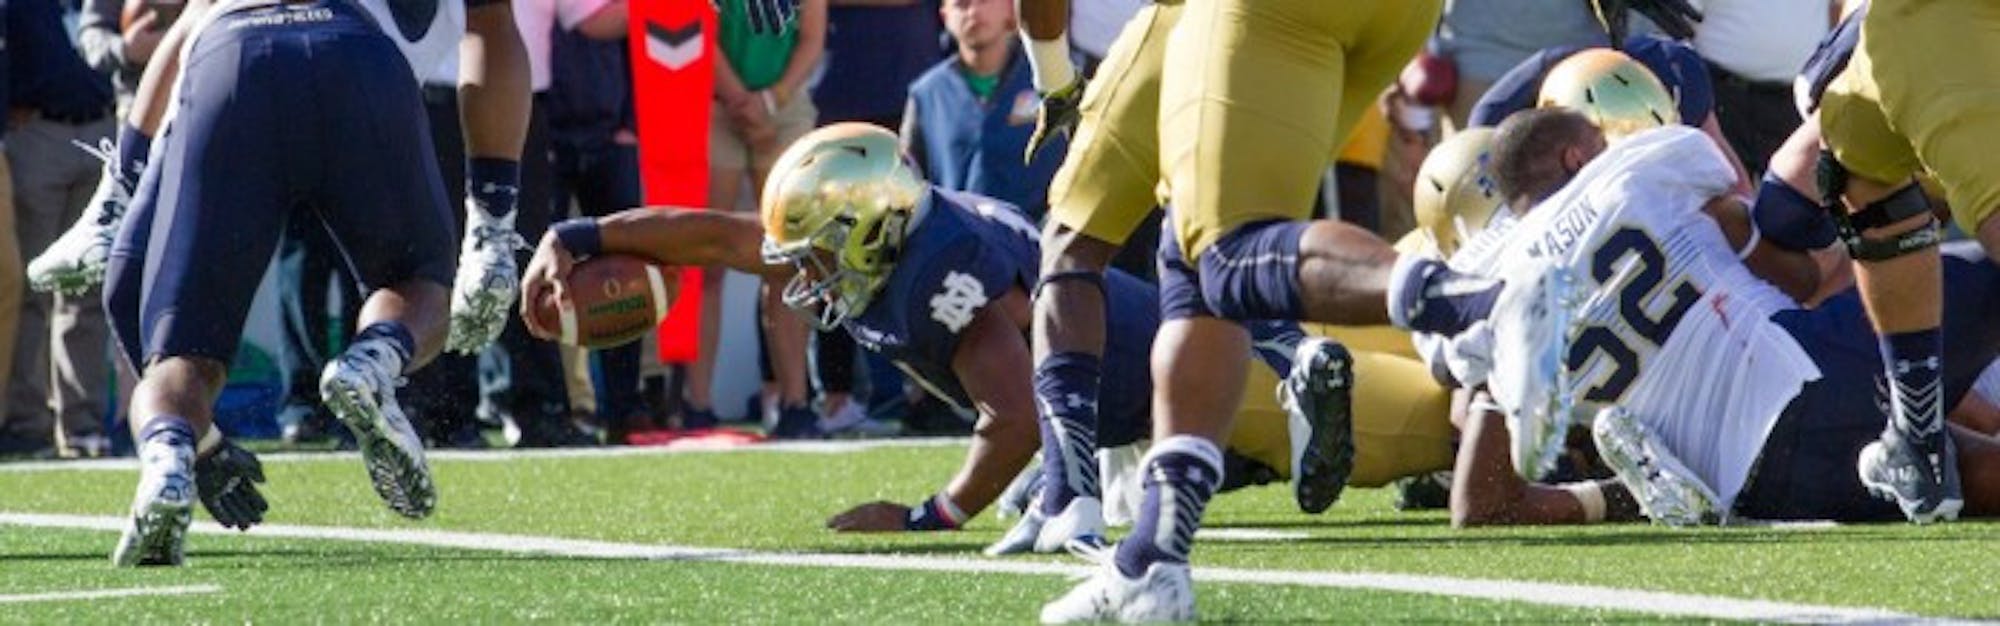 Irish sophomore quarterback DeShone Kizer stretches for the goal line during Notre Dame’s 41-24 victory. Kizer was ruled short on the play after a review, but he scored on a quarterback sneak the very next play.